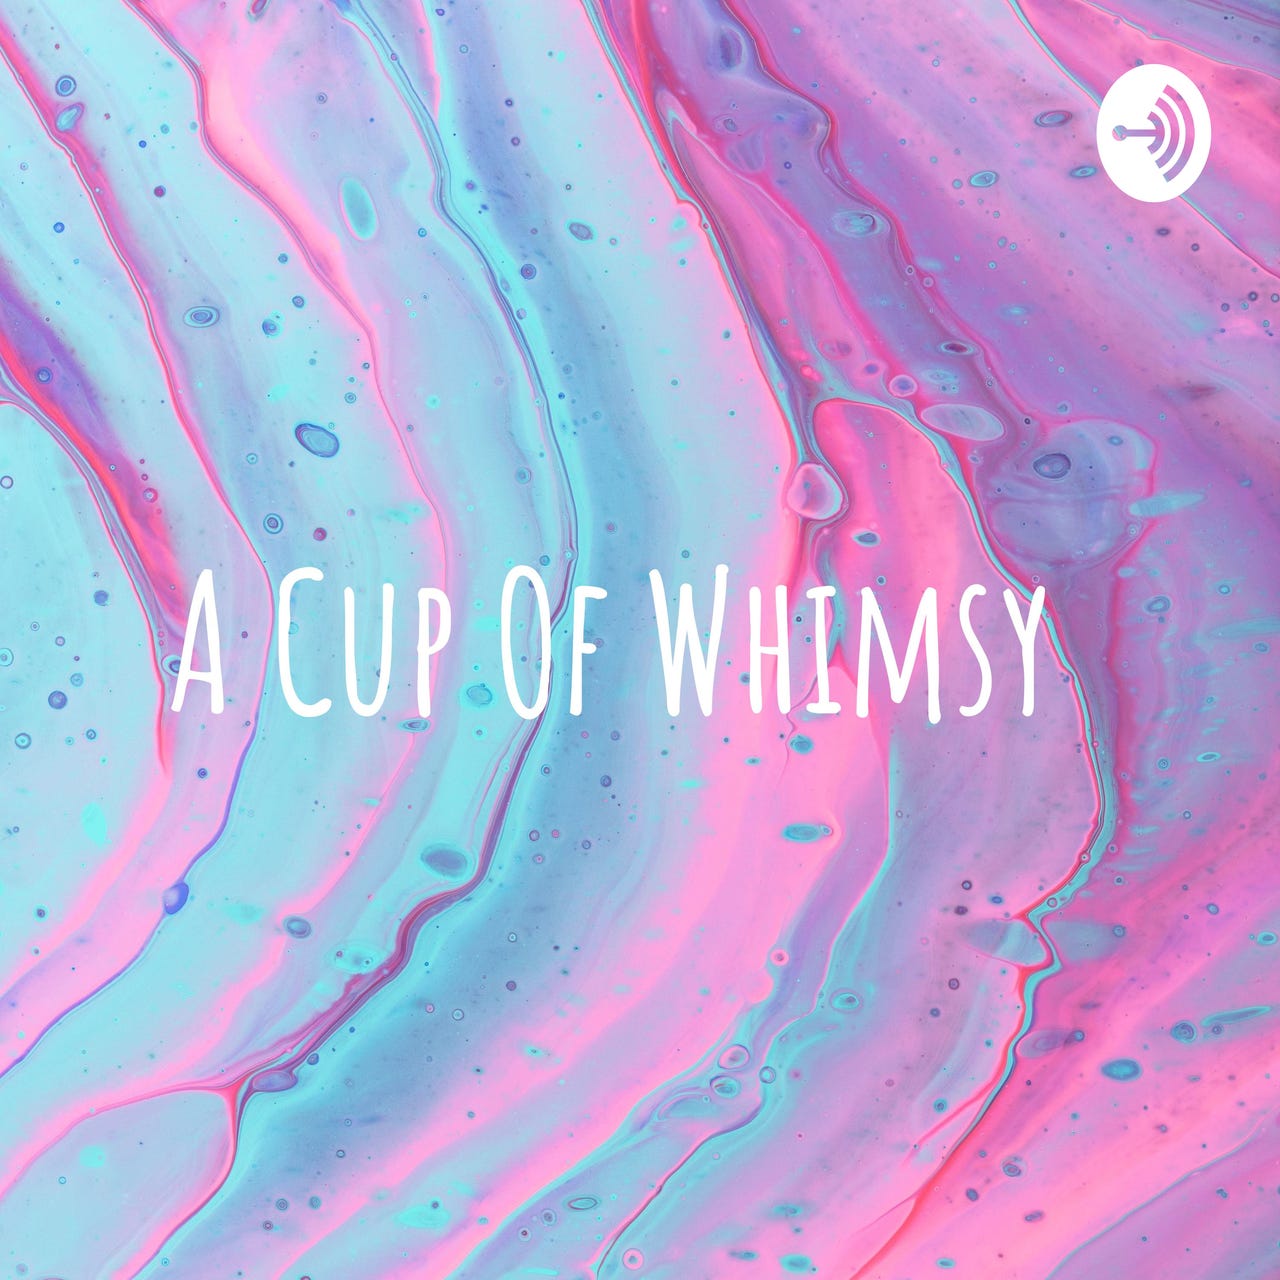 A Cup Of Whimsy